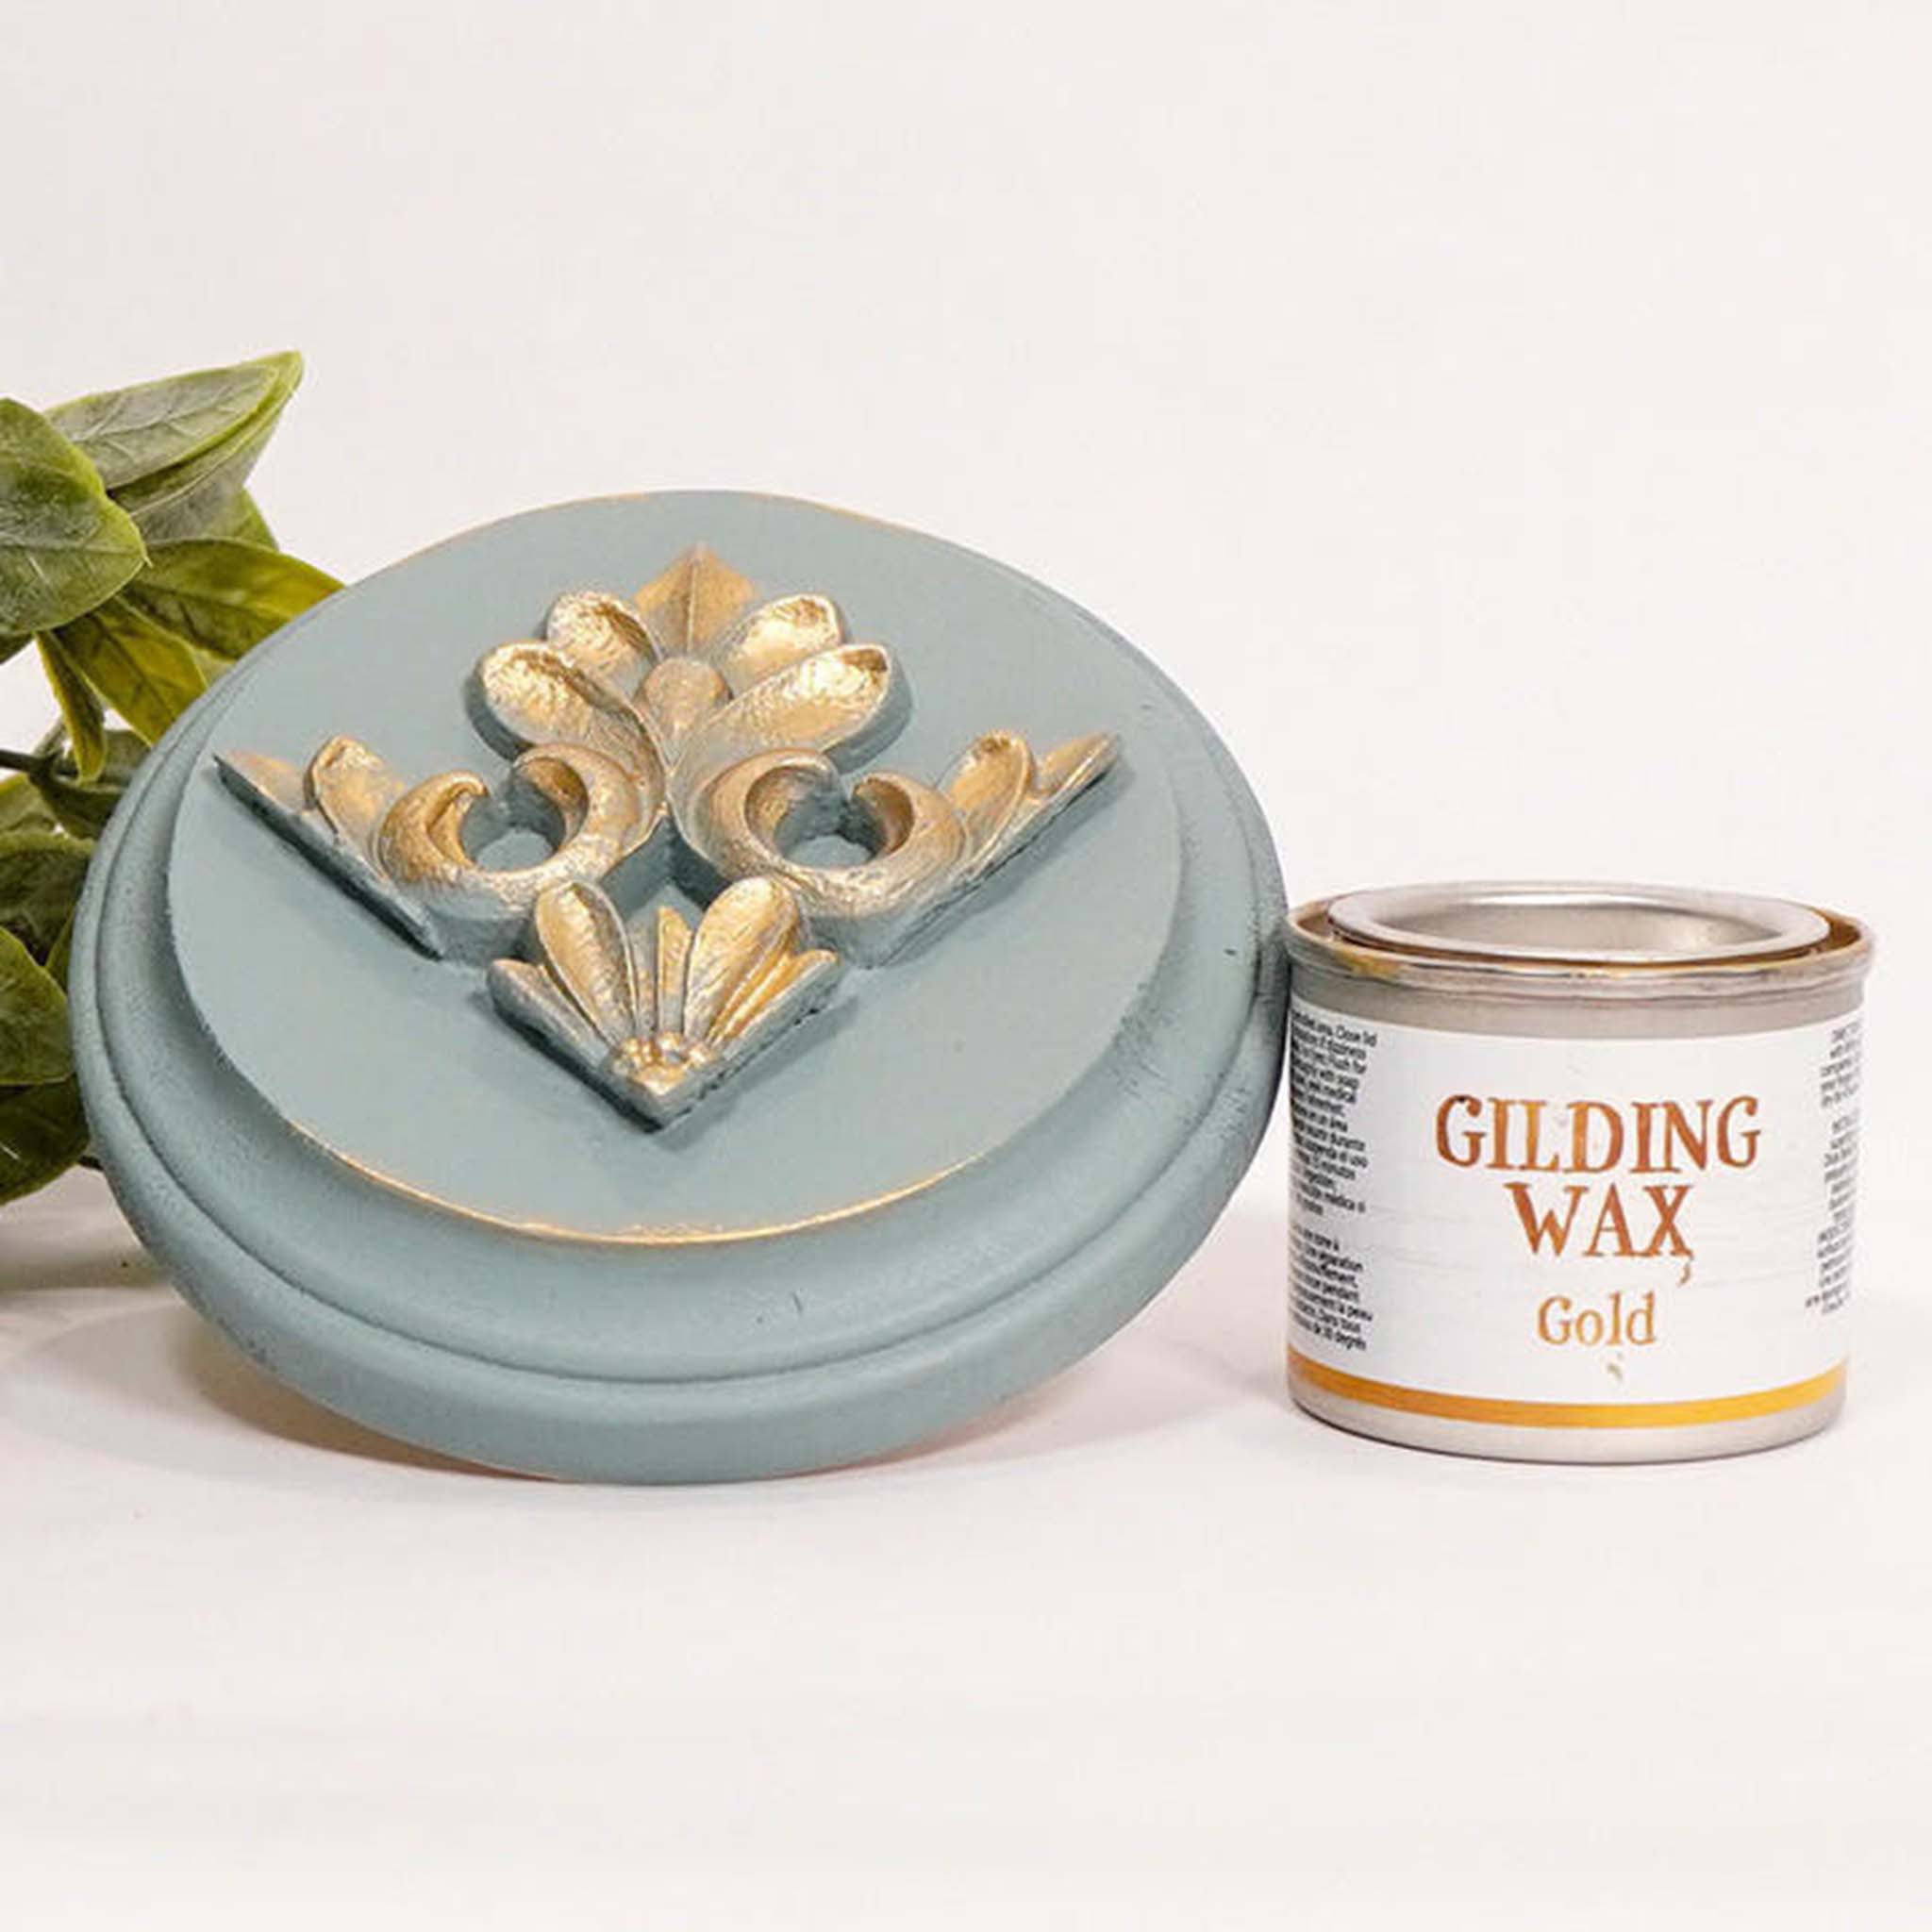 A can of Dixie Belle's Gold Gilding wax is next to a light blue painted round wood sample. The wood sample has an ornate silicone mold casting that features the gold gilding wax on it.